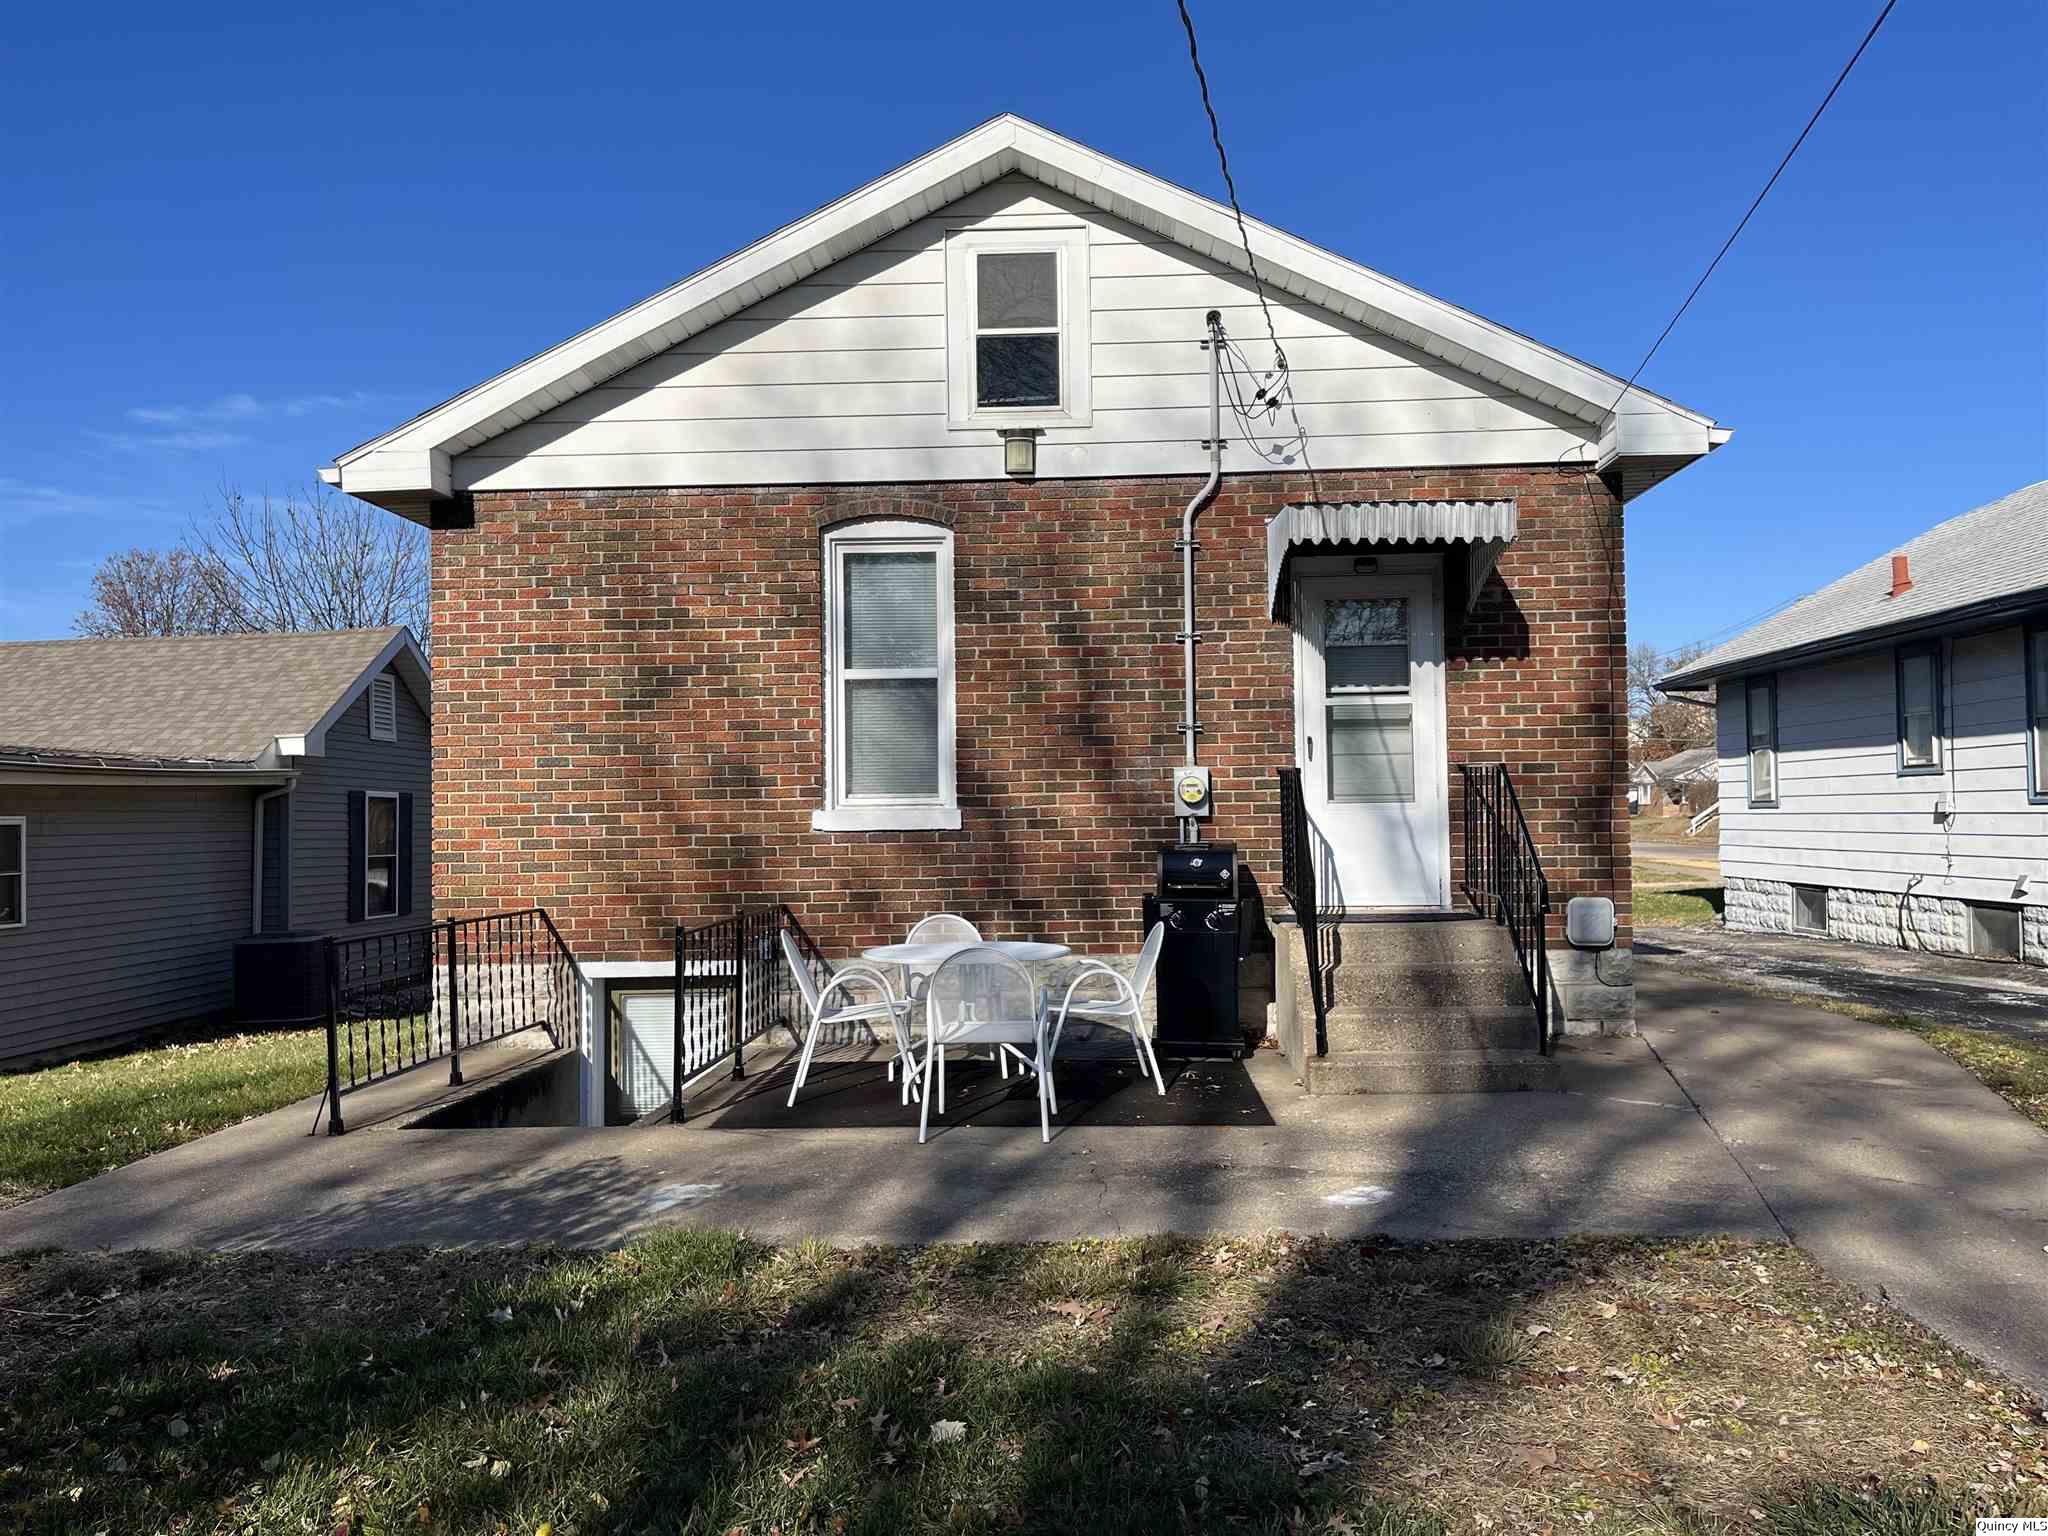 2738 College Ave., Quincy, Illinois 62301, 2 Bedrooms Bedrooms, ,1 BathroomBathrooms,Residential,For Sale,2738 College Ave.,203132